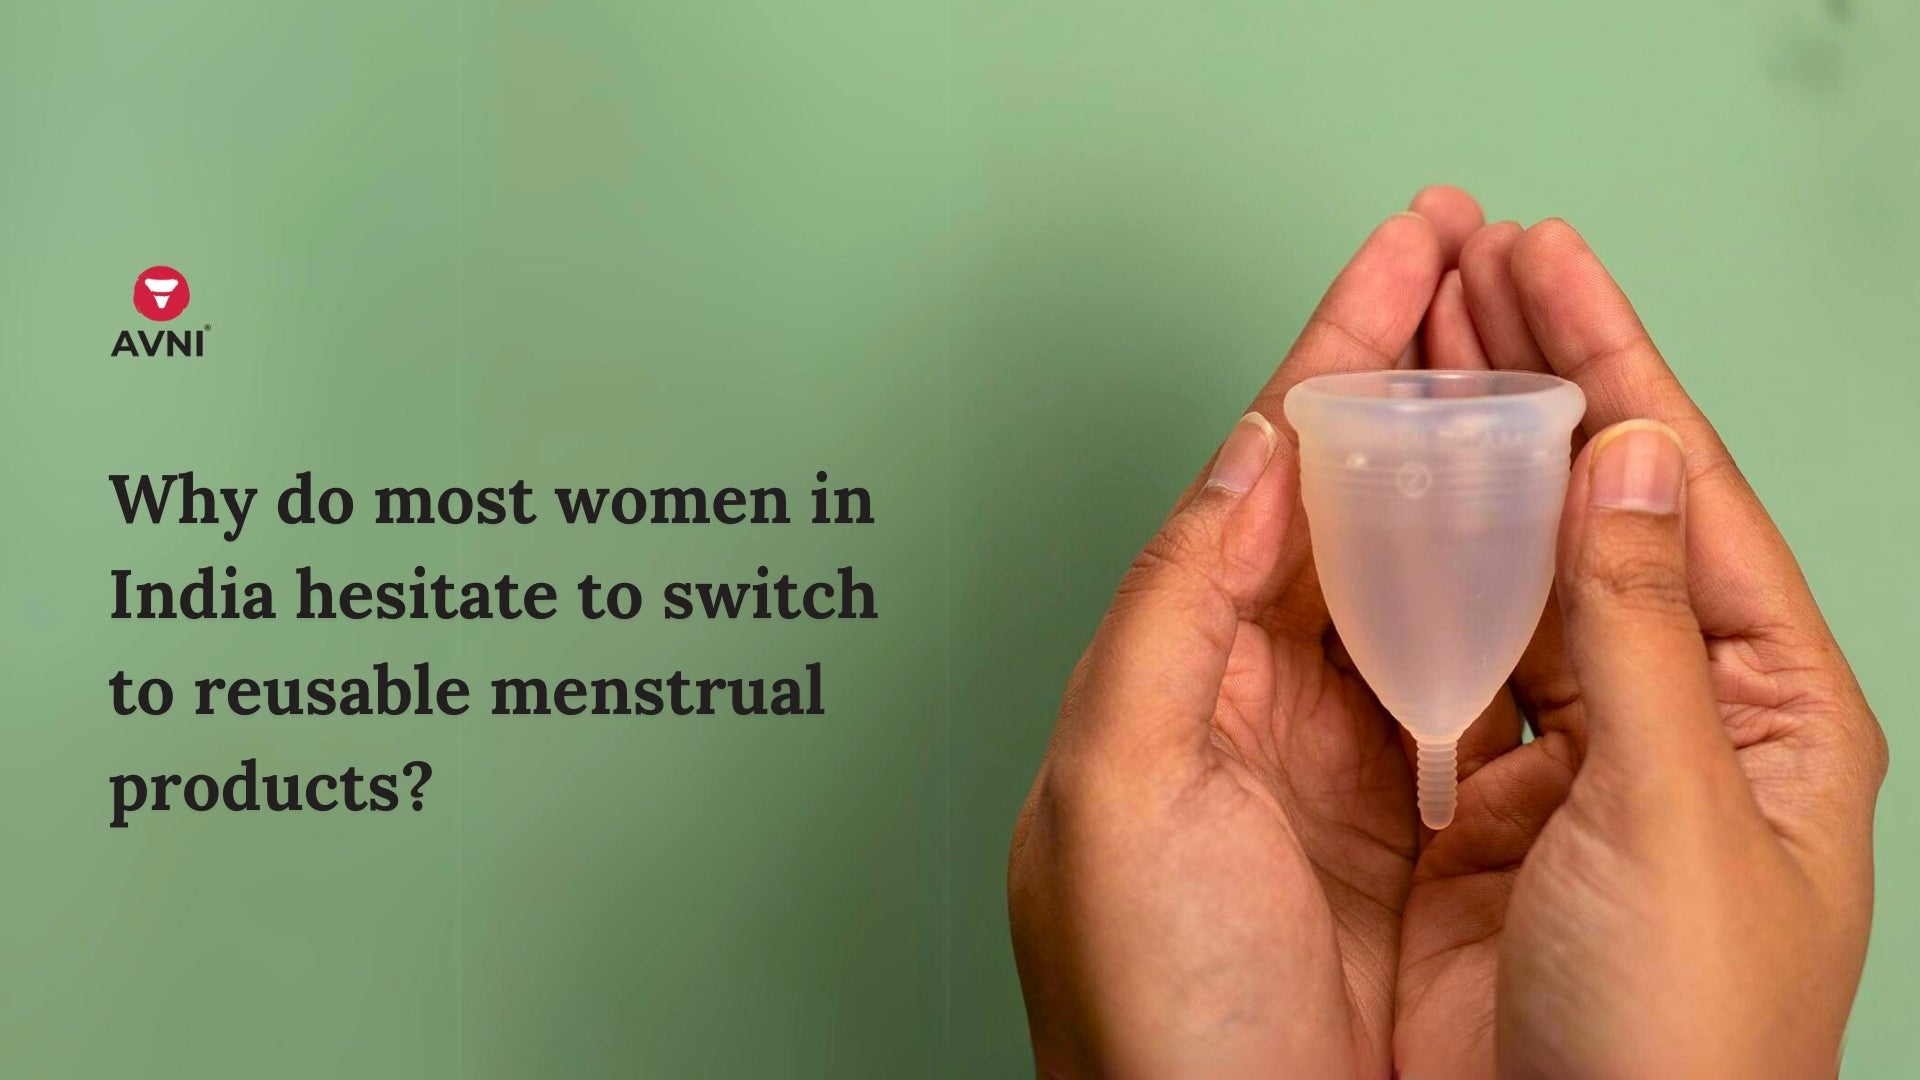 Reusable Menstrual & Period Products